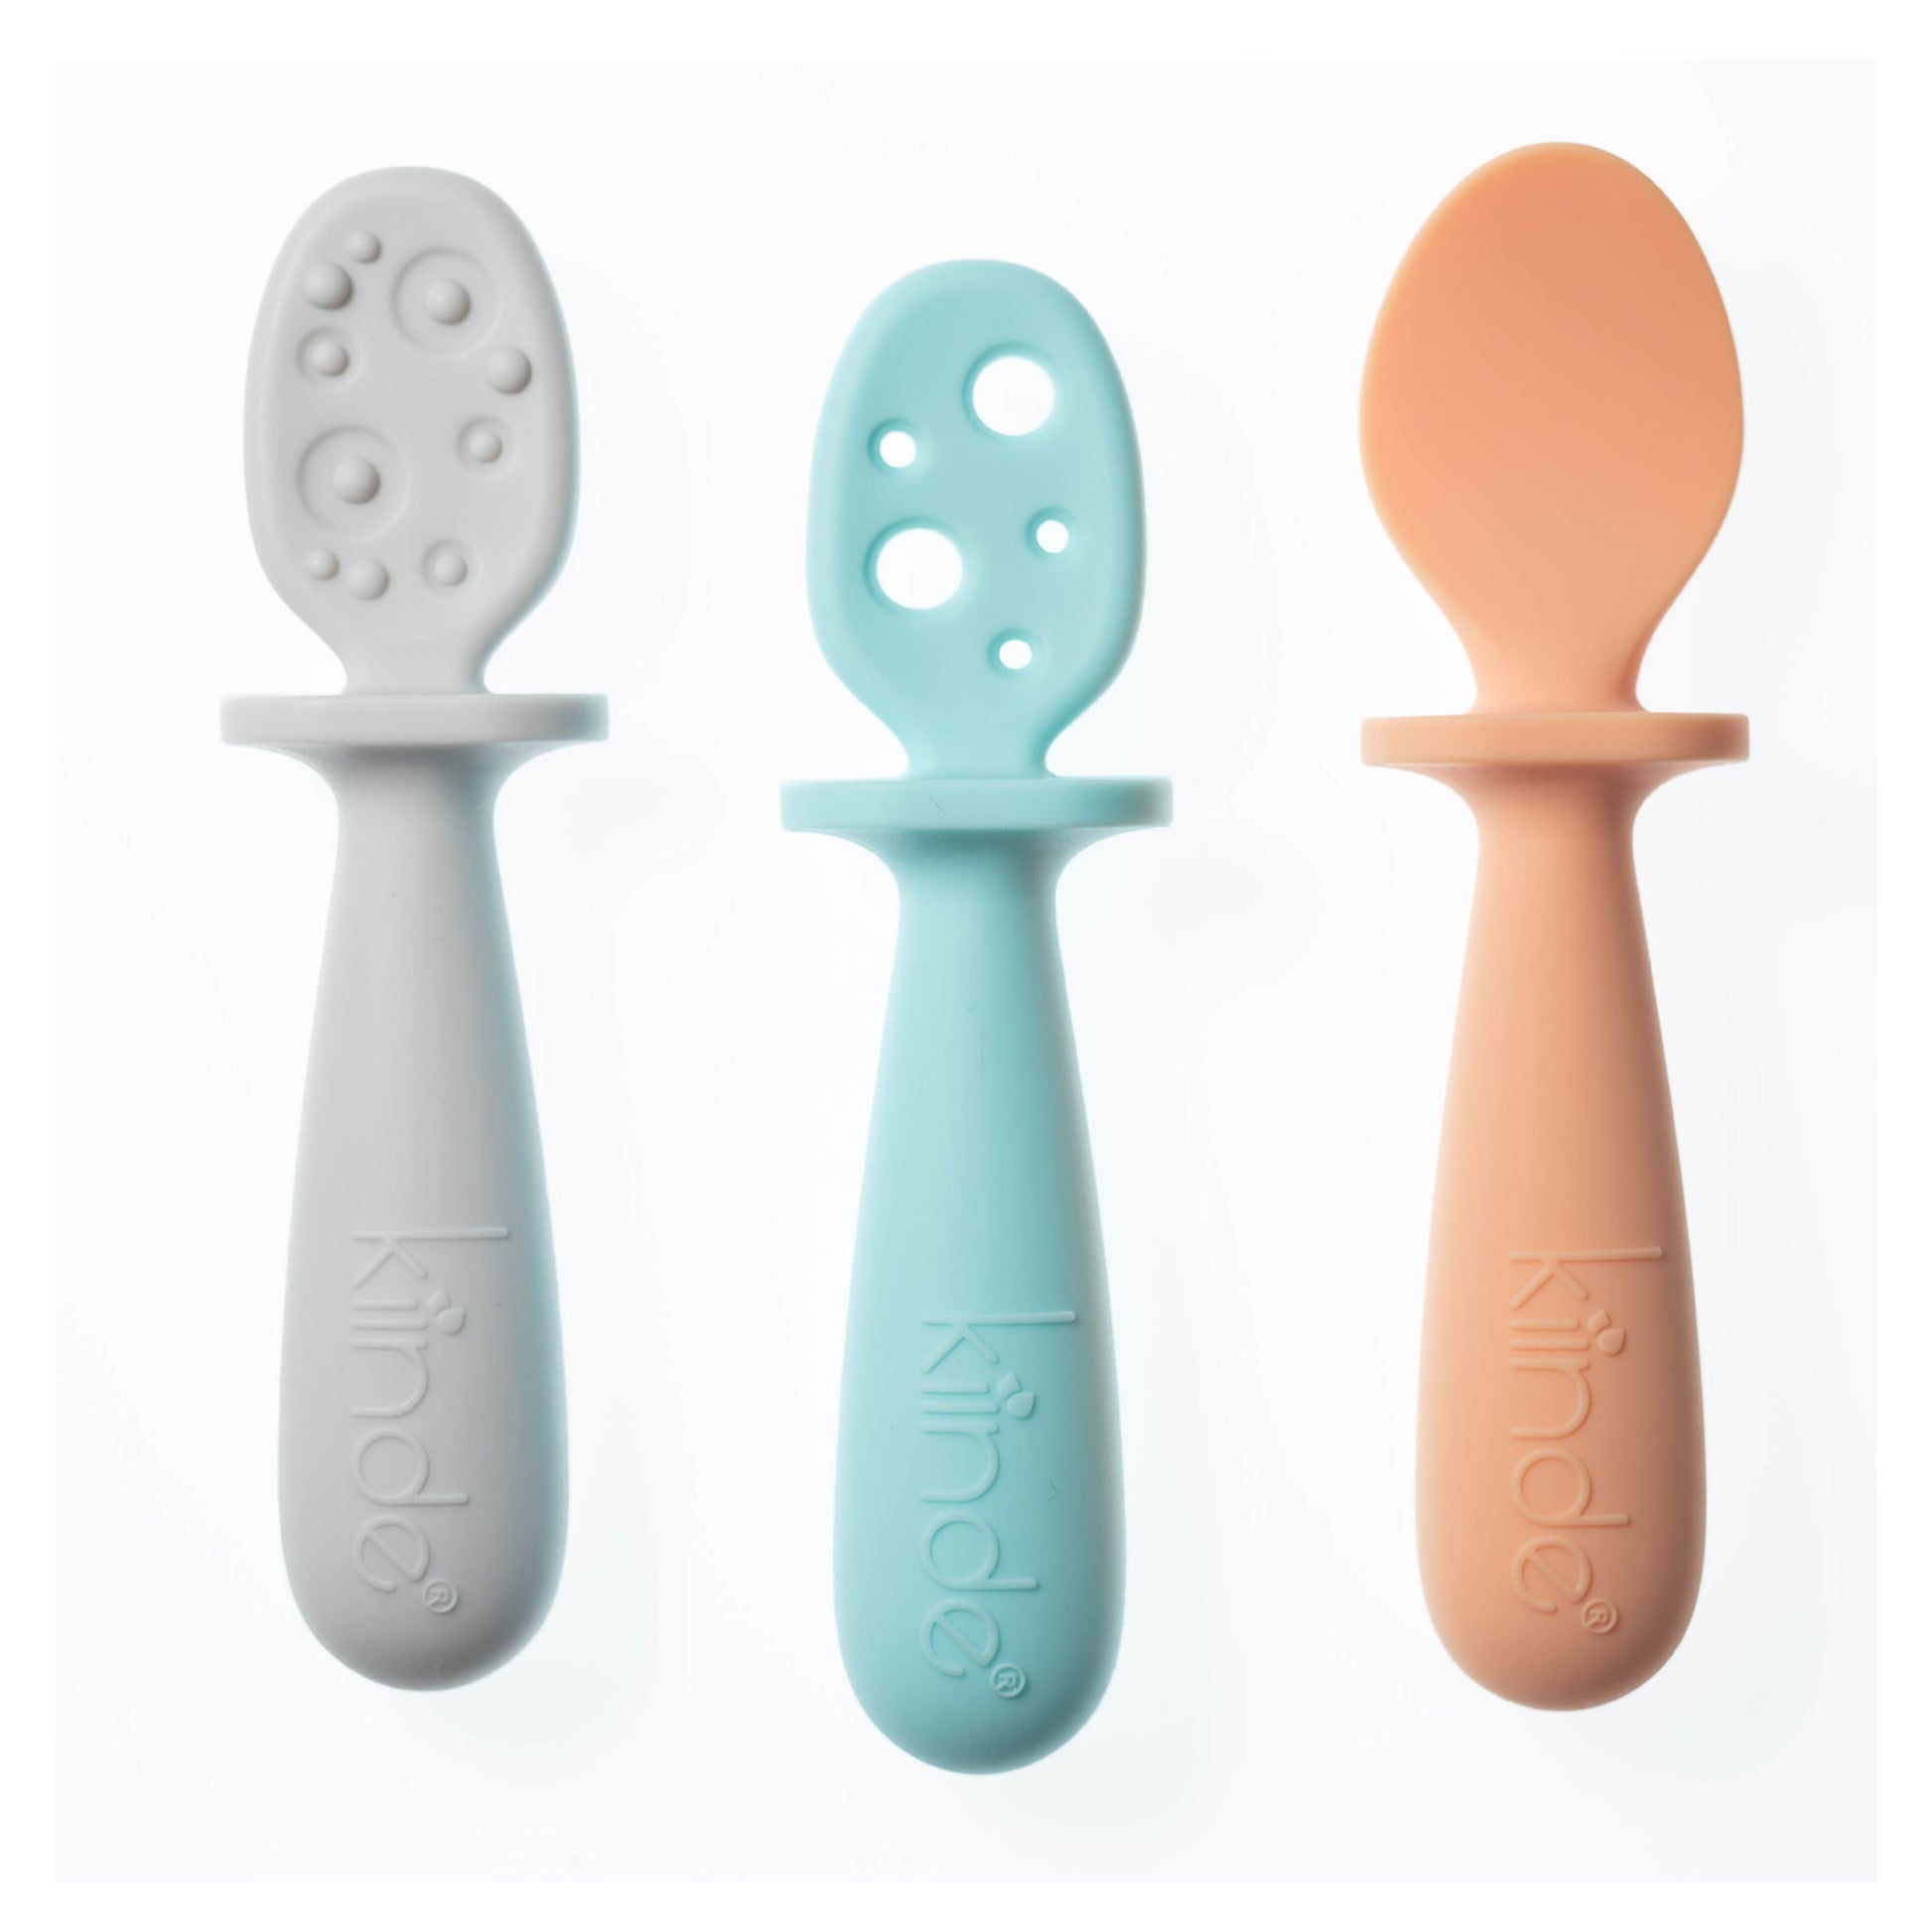 Silicone Mixing Spoon - FLZY247 - IdeaStage Promotional Products